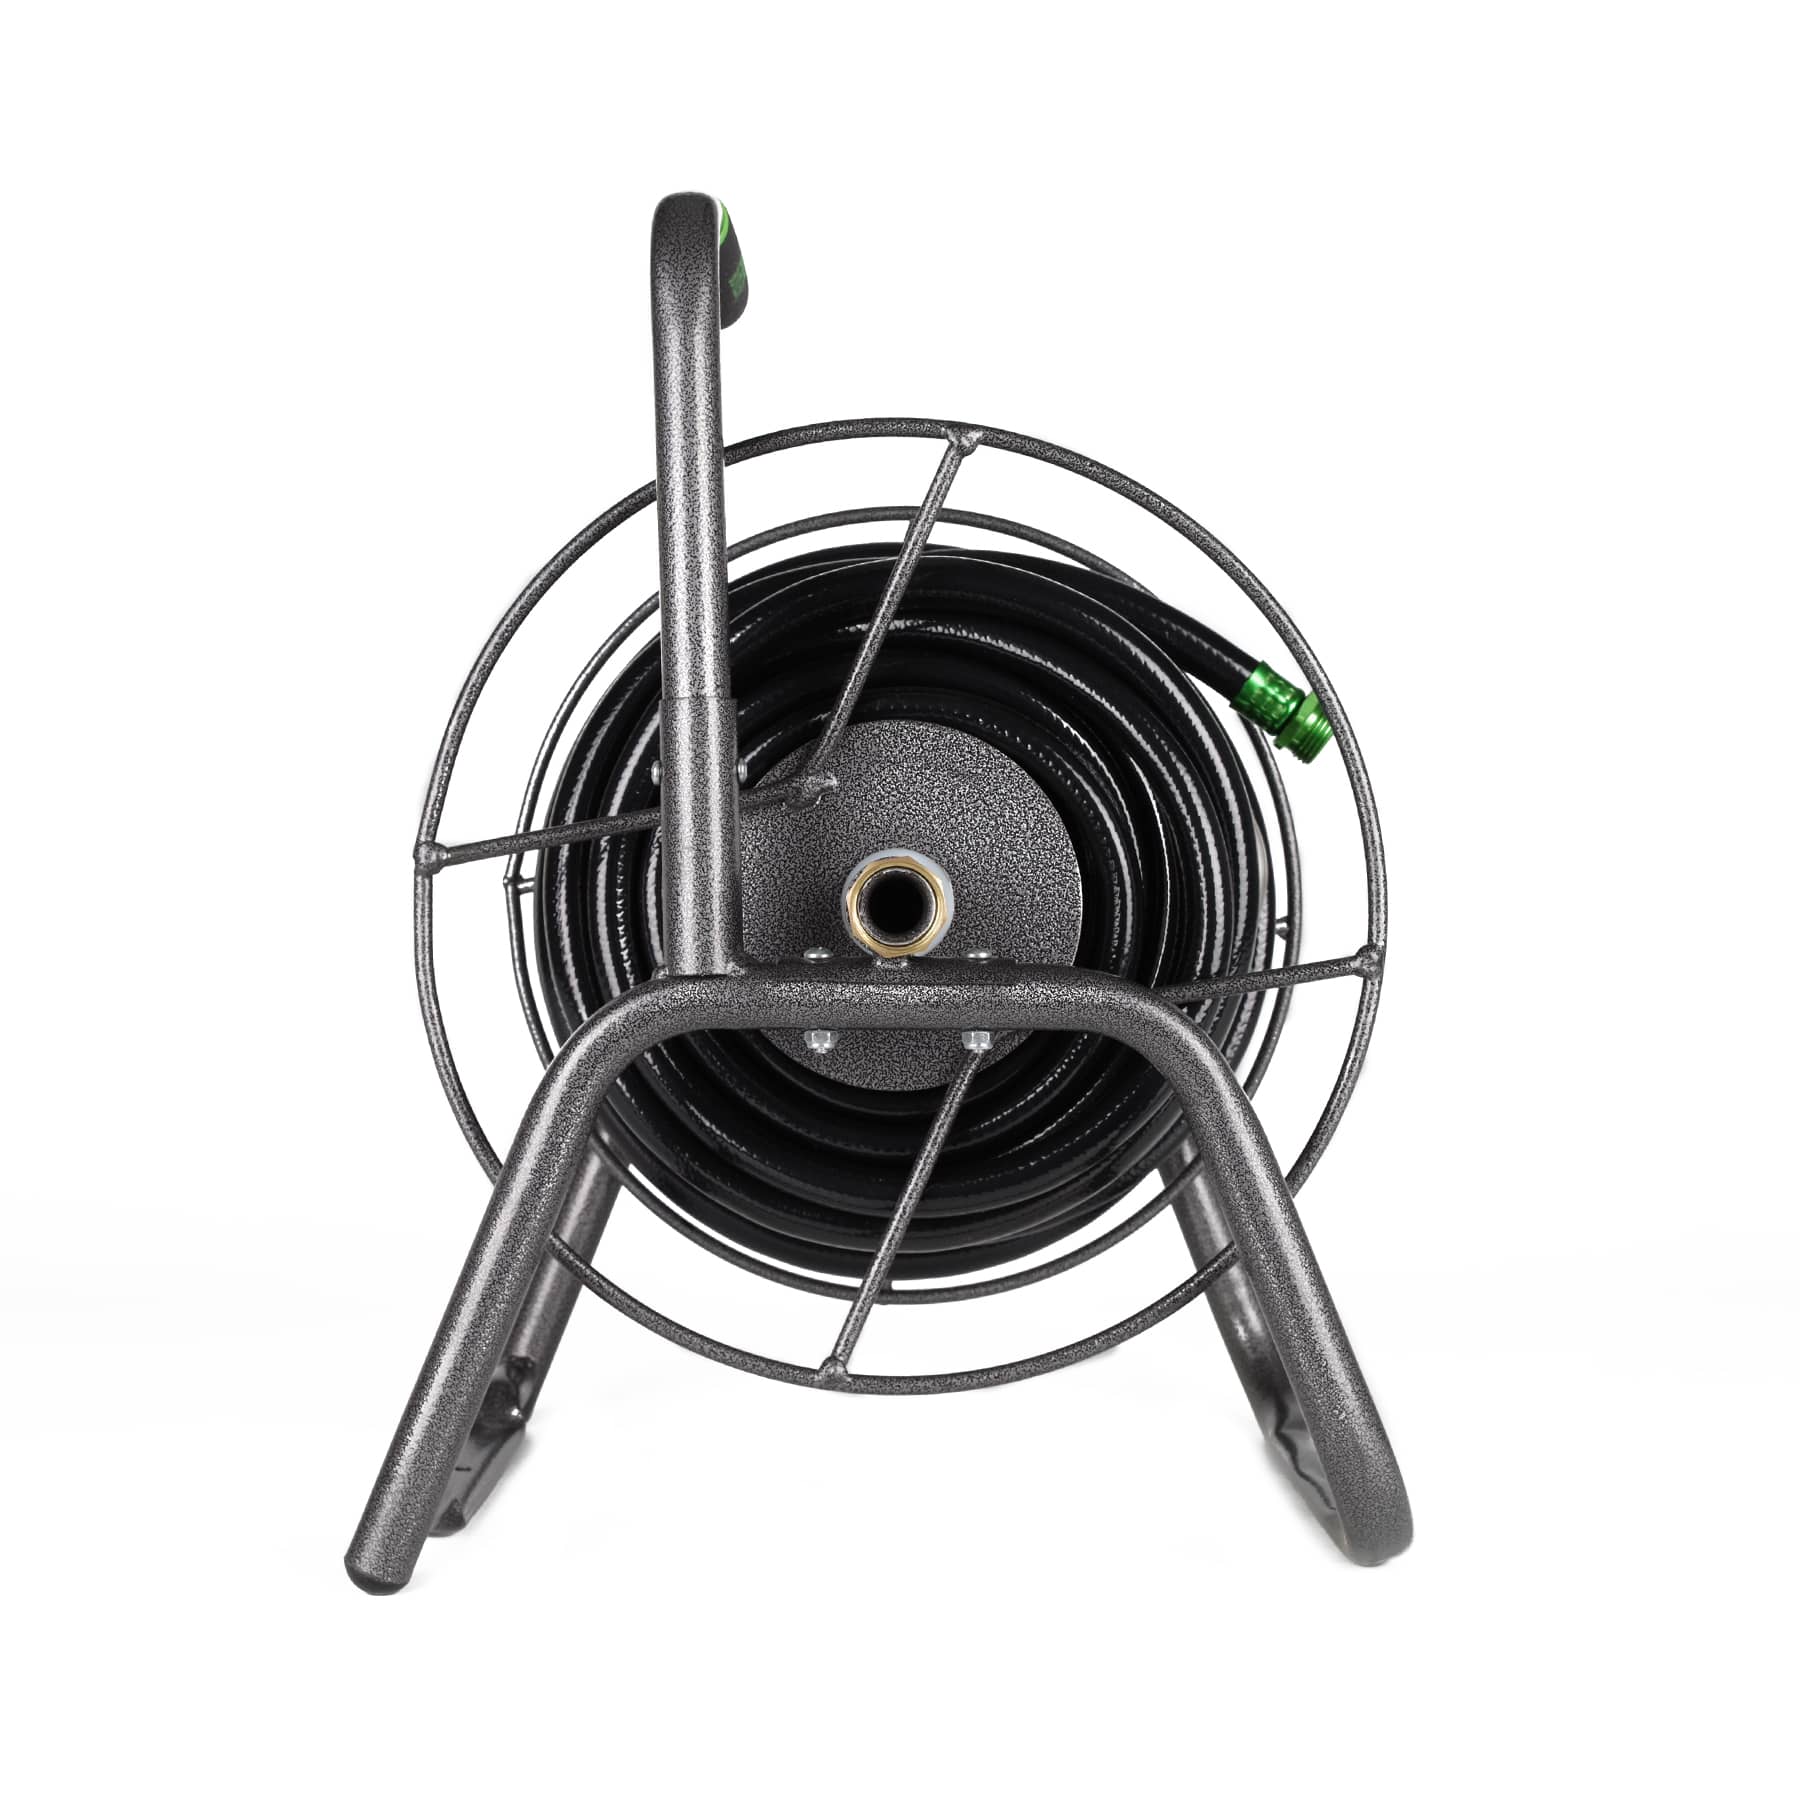 Yard Butler Handy Reel Heavy-Duty Ground And Wall Mount, 42% OFF